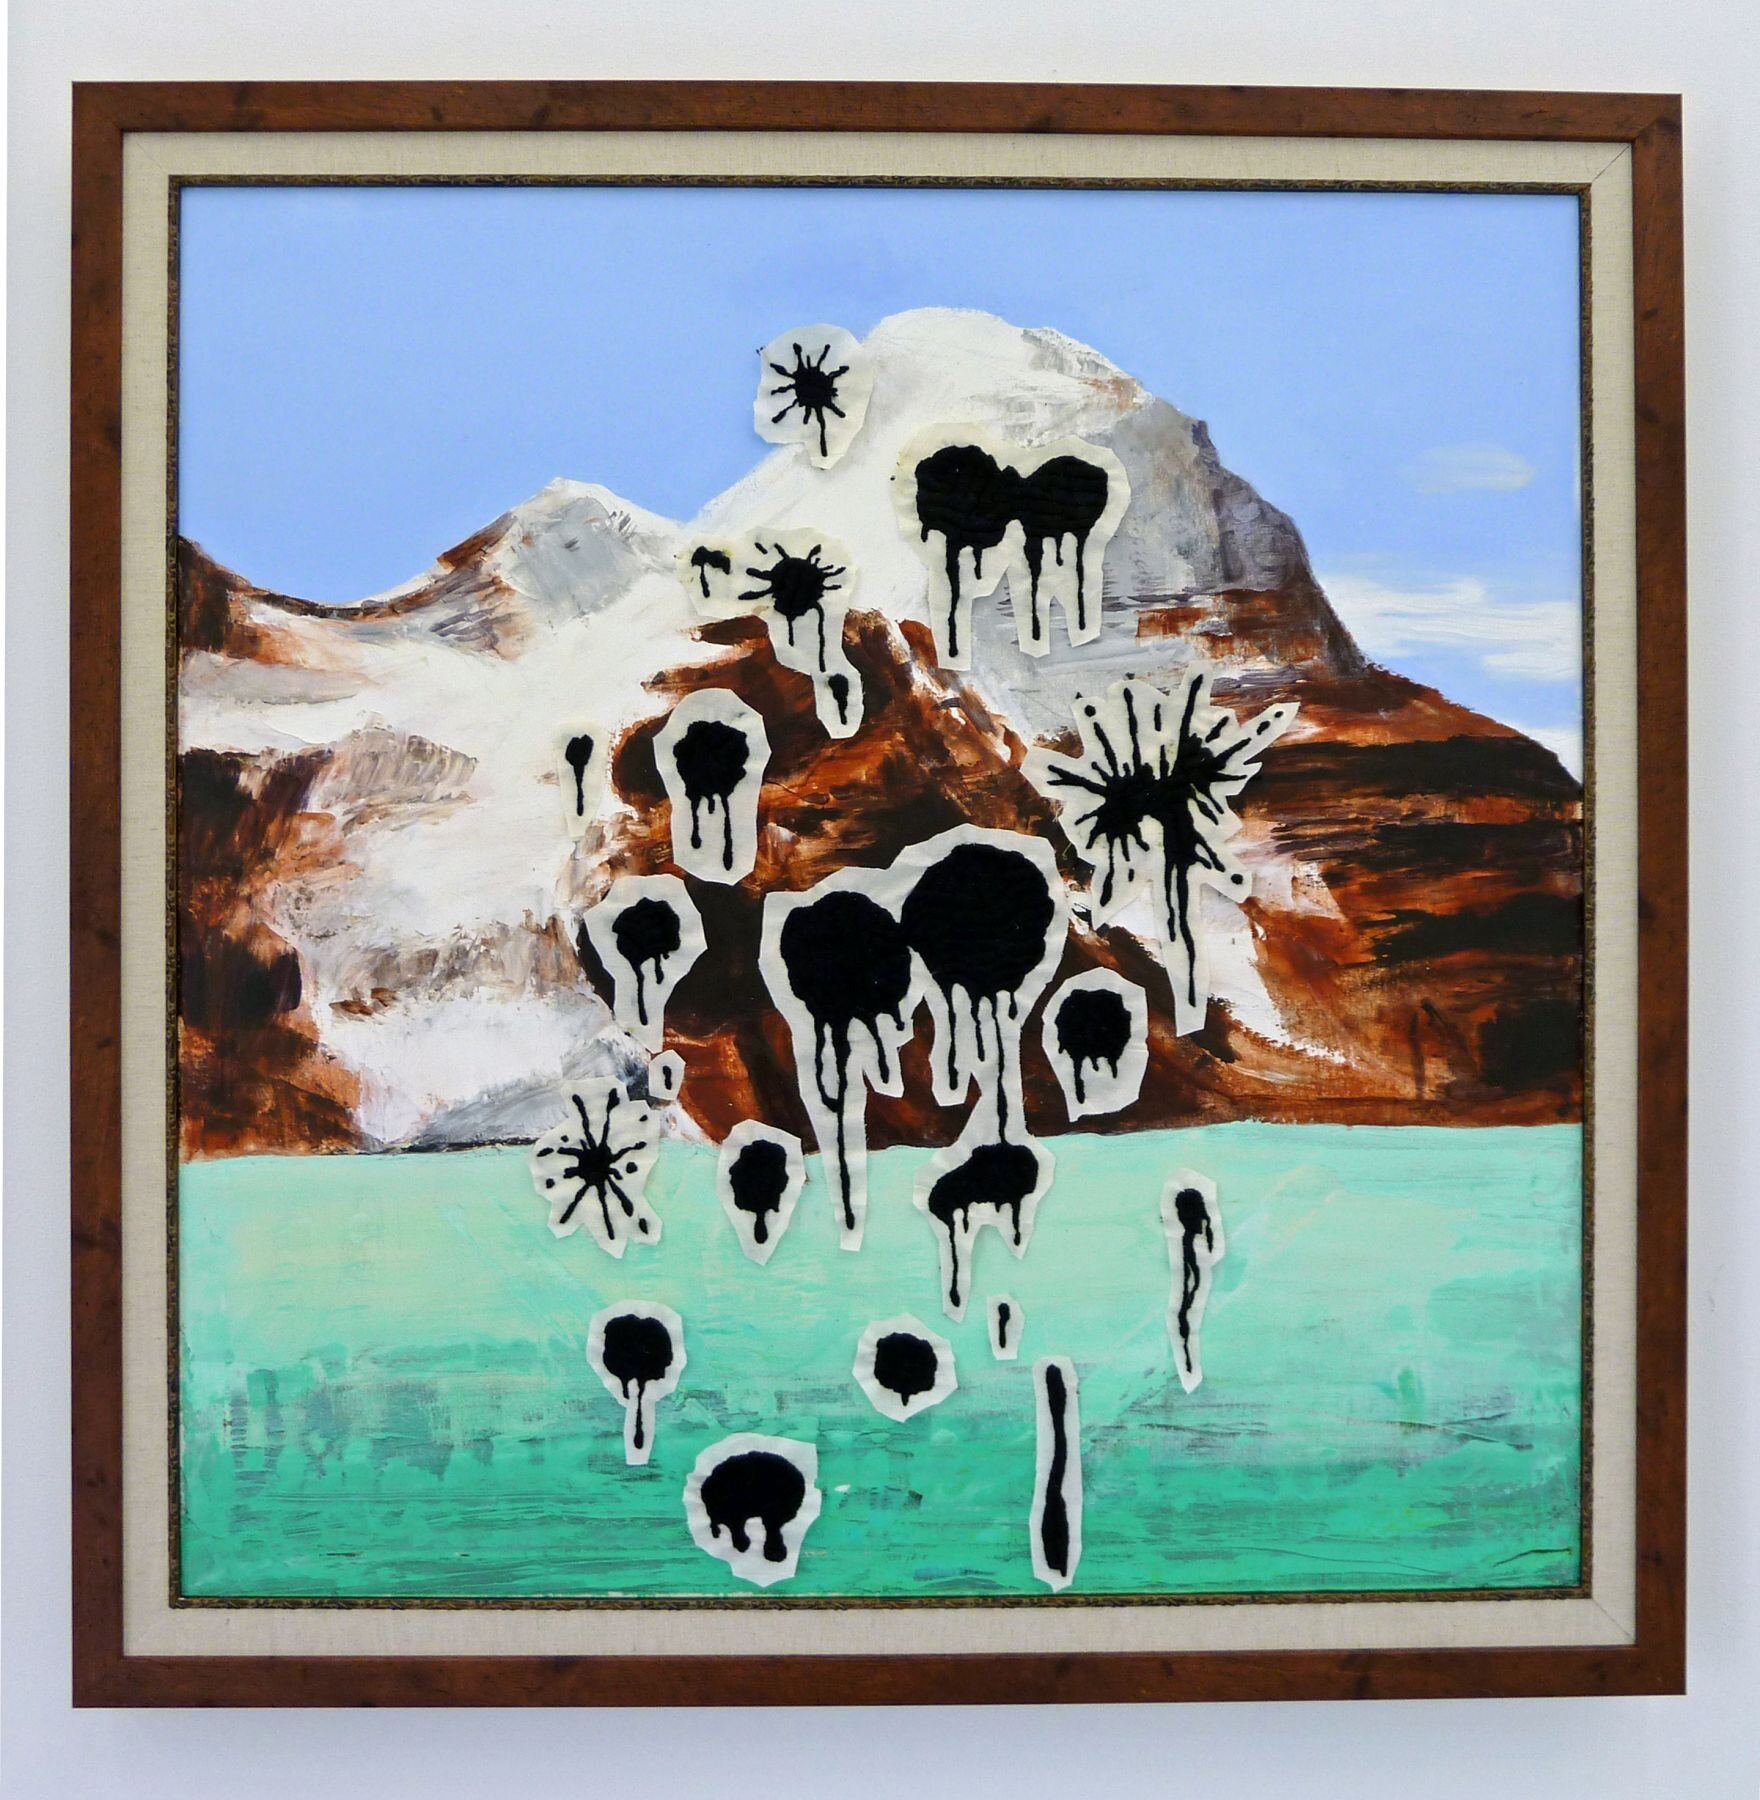 Paintings for the Home (Landscape), 2010